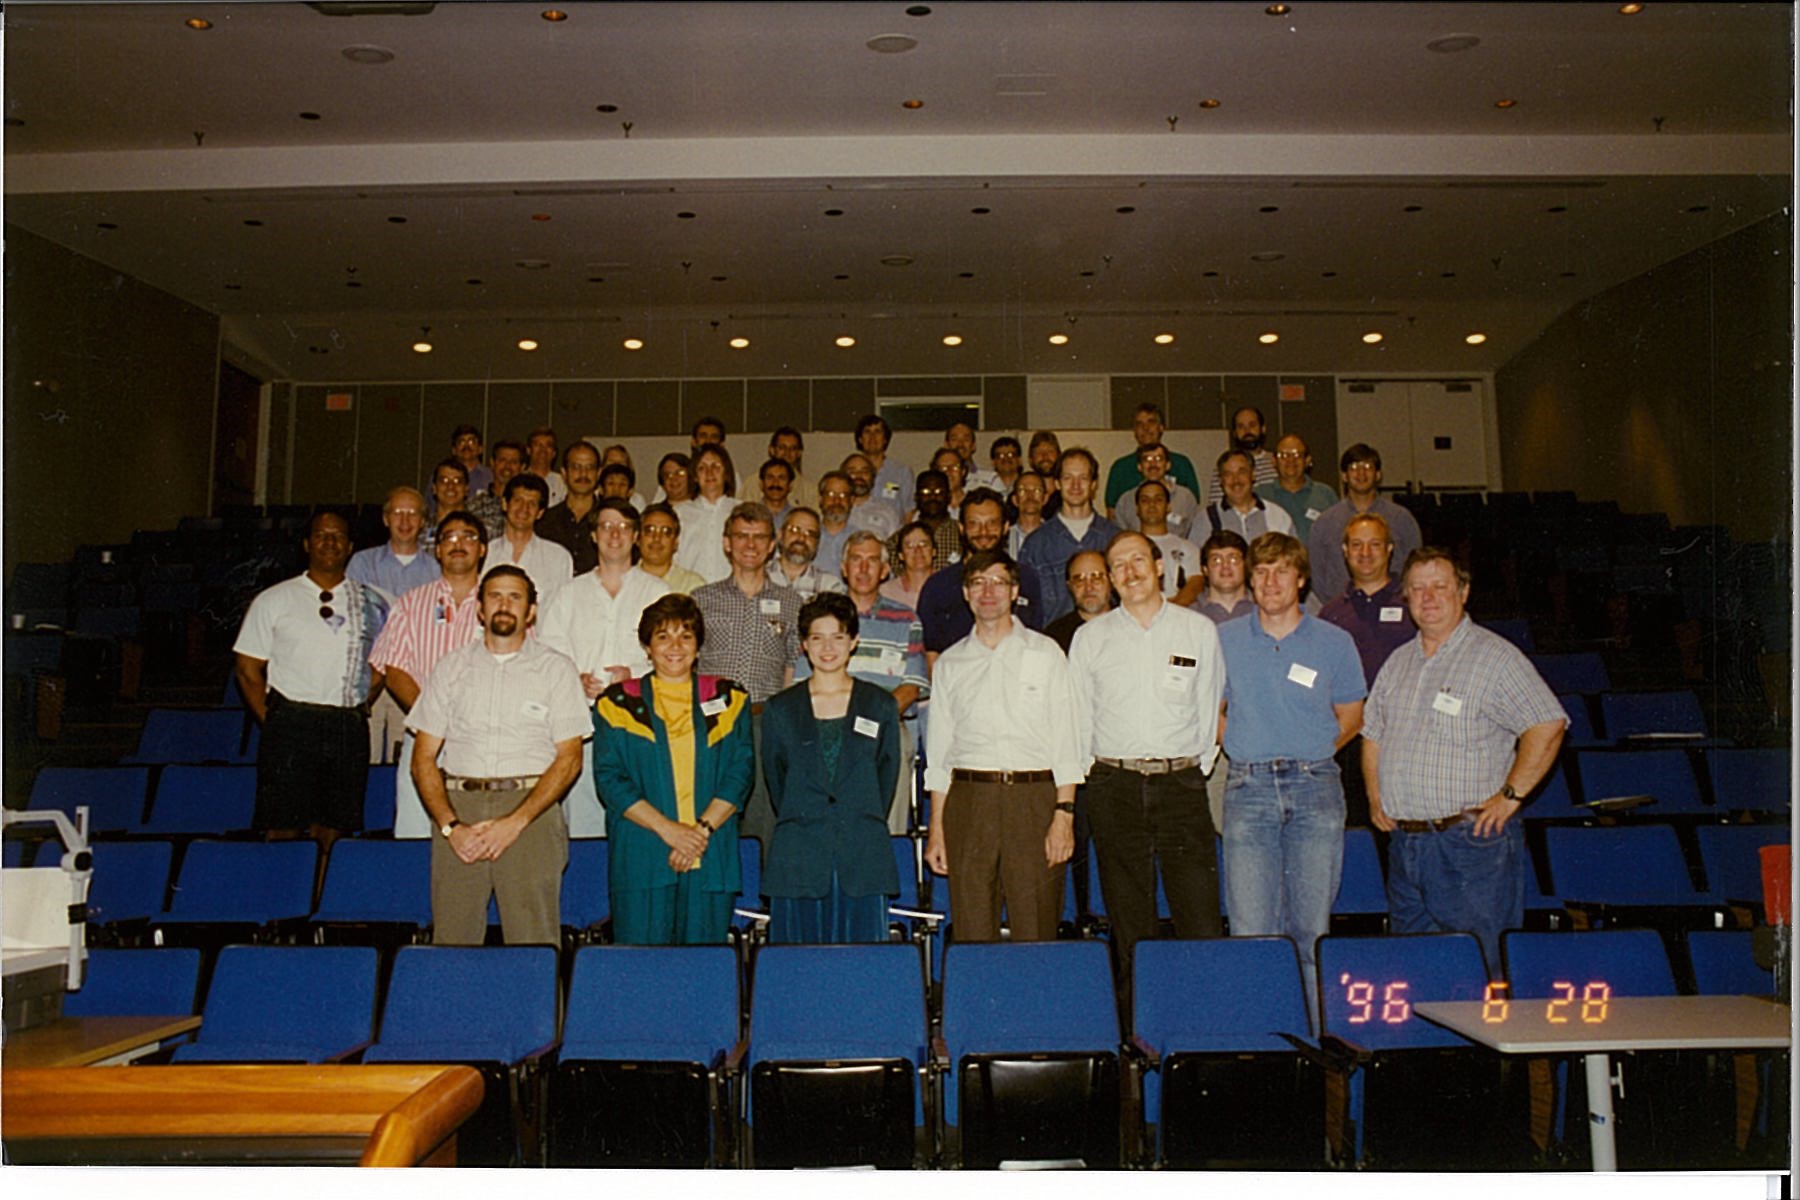 Lab Director Stuart Henderson, Cornell University (2nd row, 3rd from left), attends the inaugural Accelerator Operations Workshop held at CEBAF, on June 26, 1996.